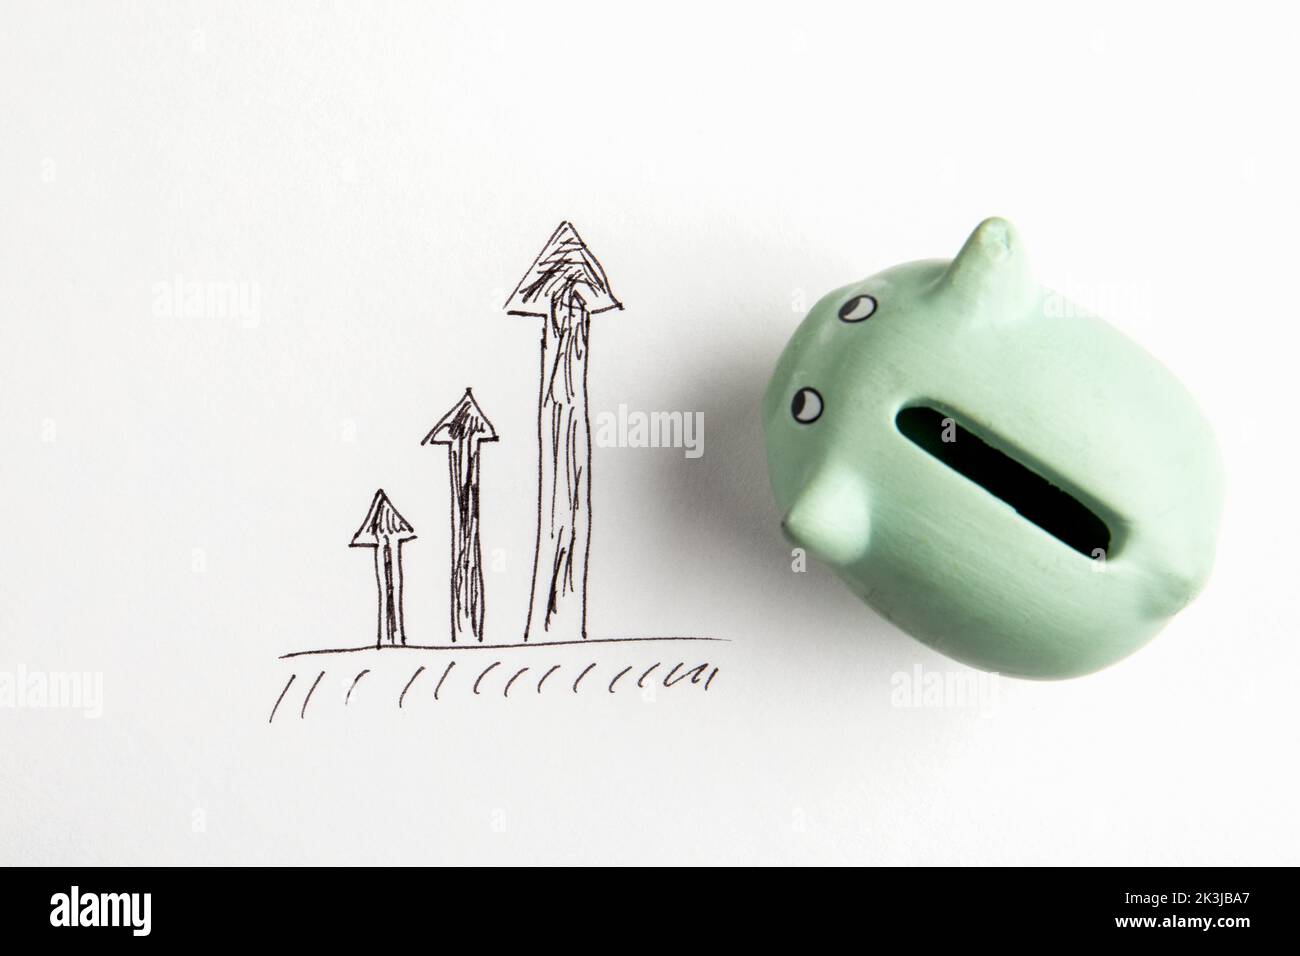 Business growth success process concept. Piggy bank on a white background. Stock Photo